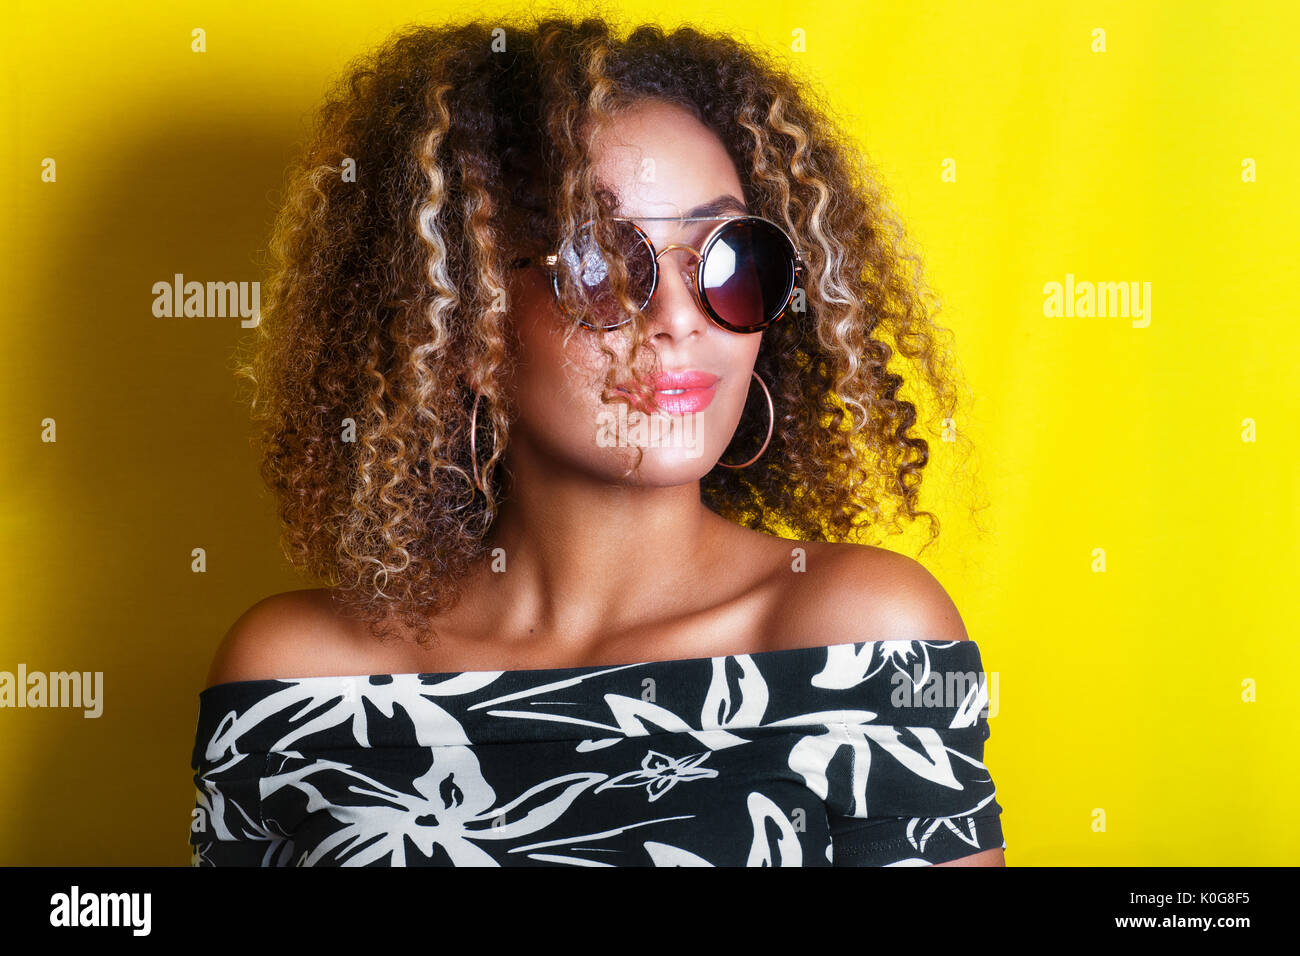 portrait indoors of a young afro american woman in sunglasses. Yellow background. Lifestyle. Stock Photo